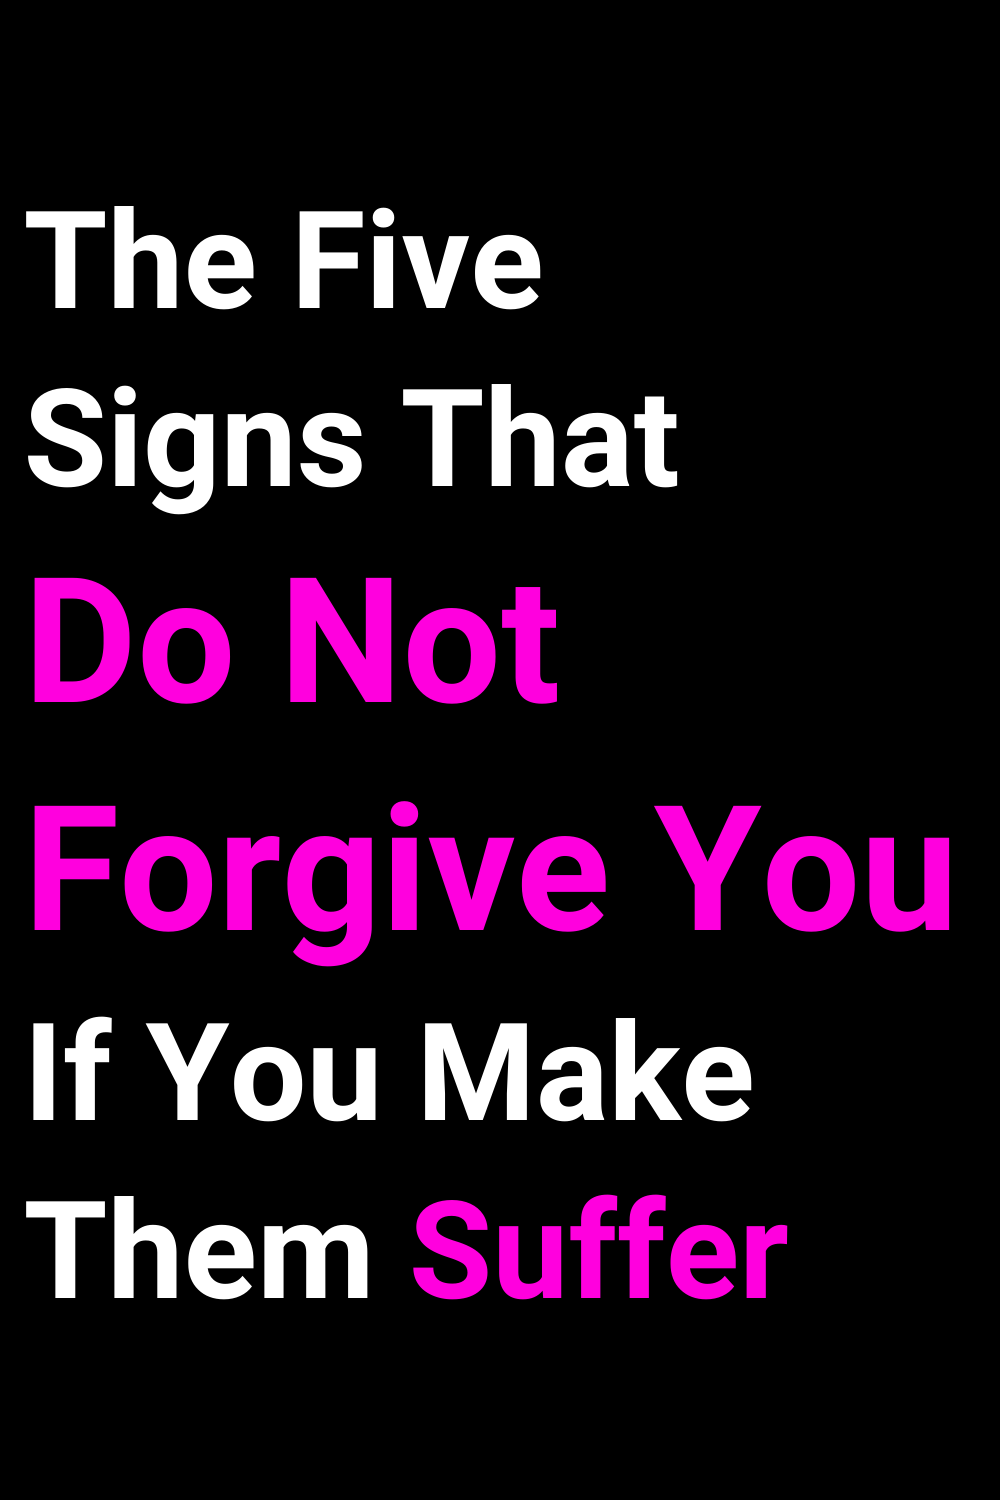 The Five Signs That Do Not Forgive You If You Make Them Suffer